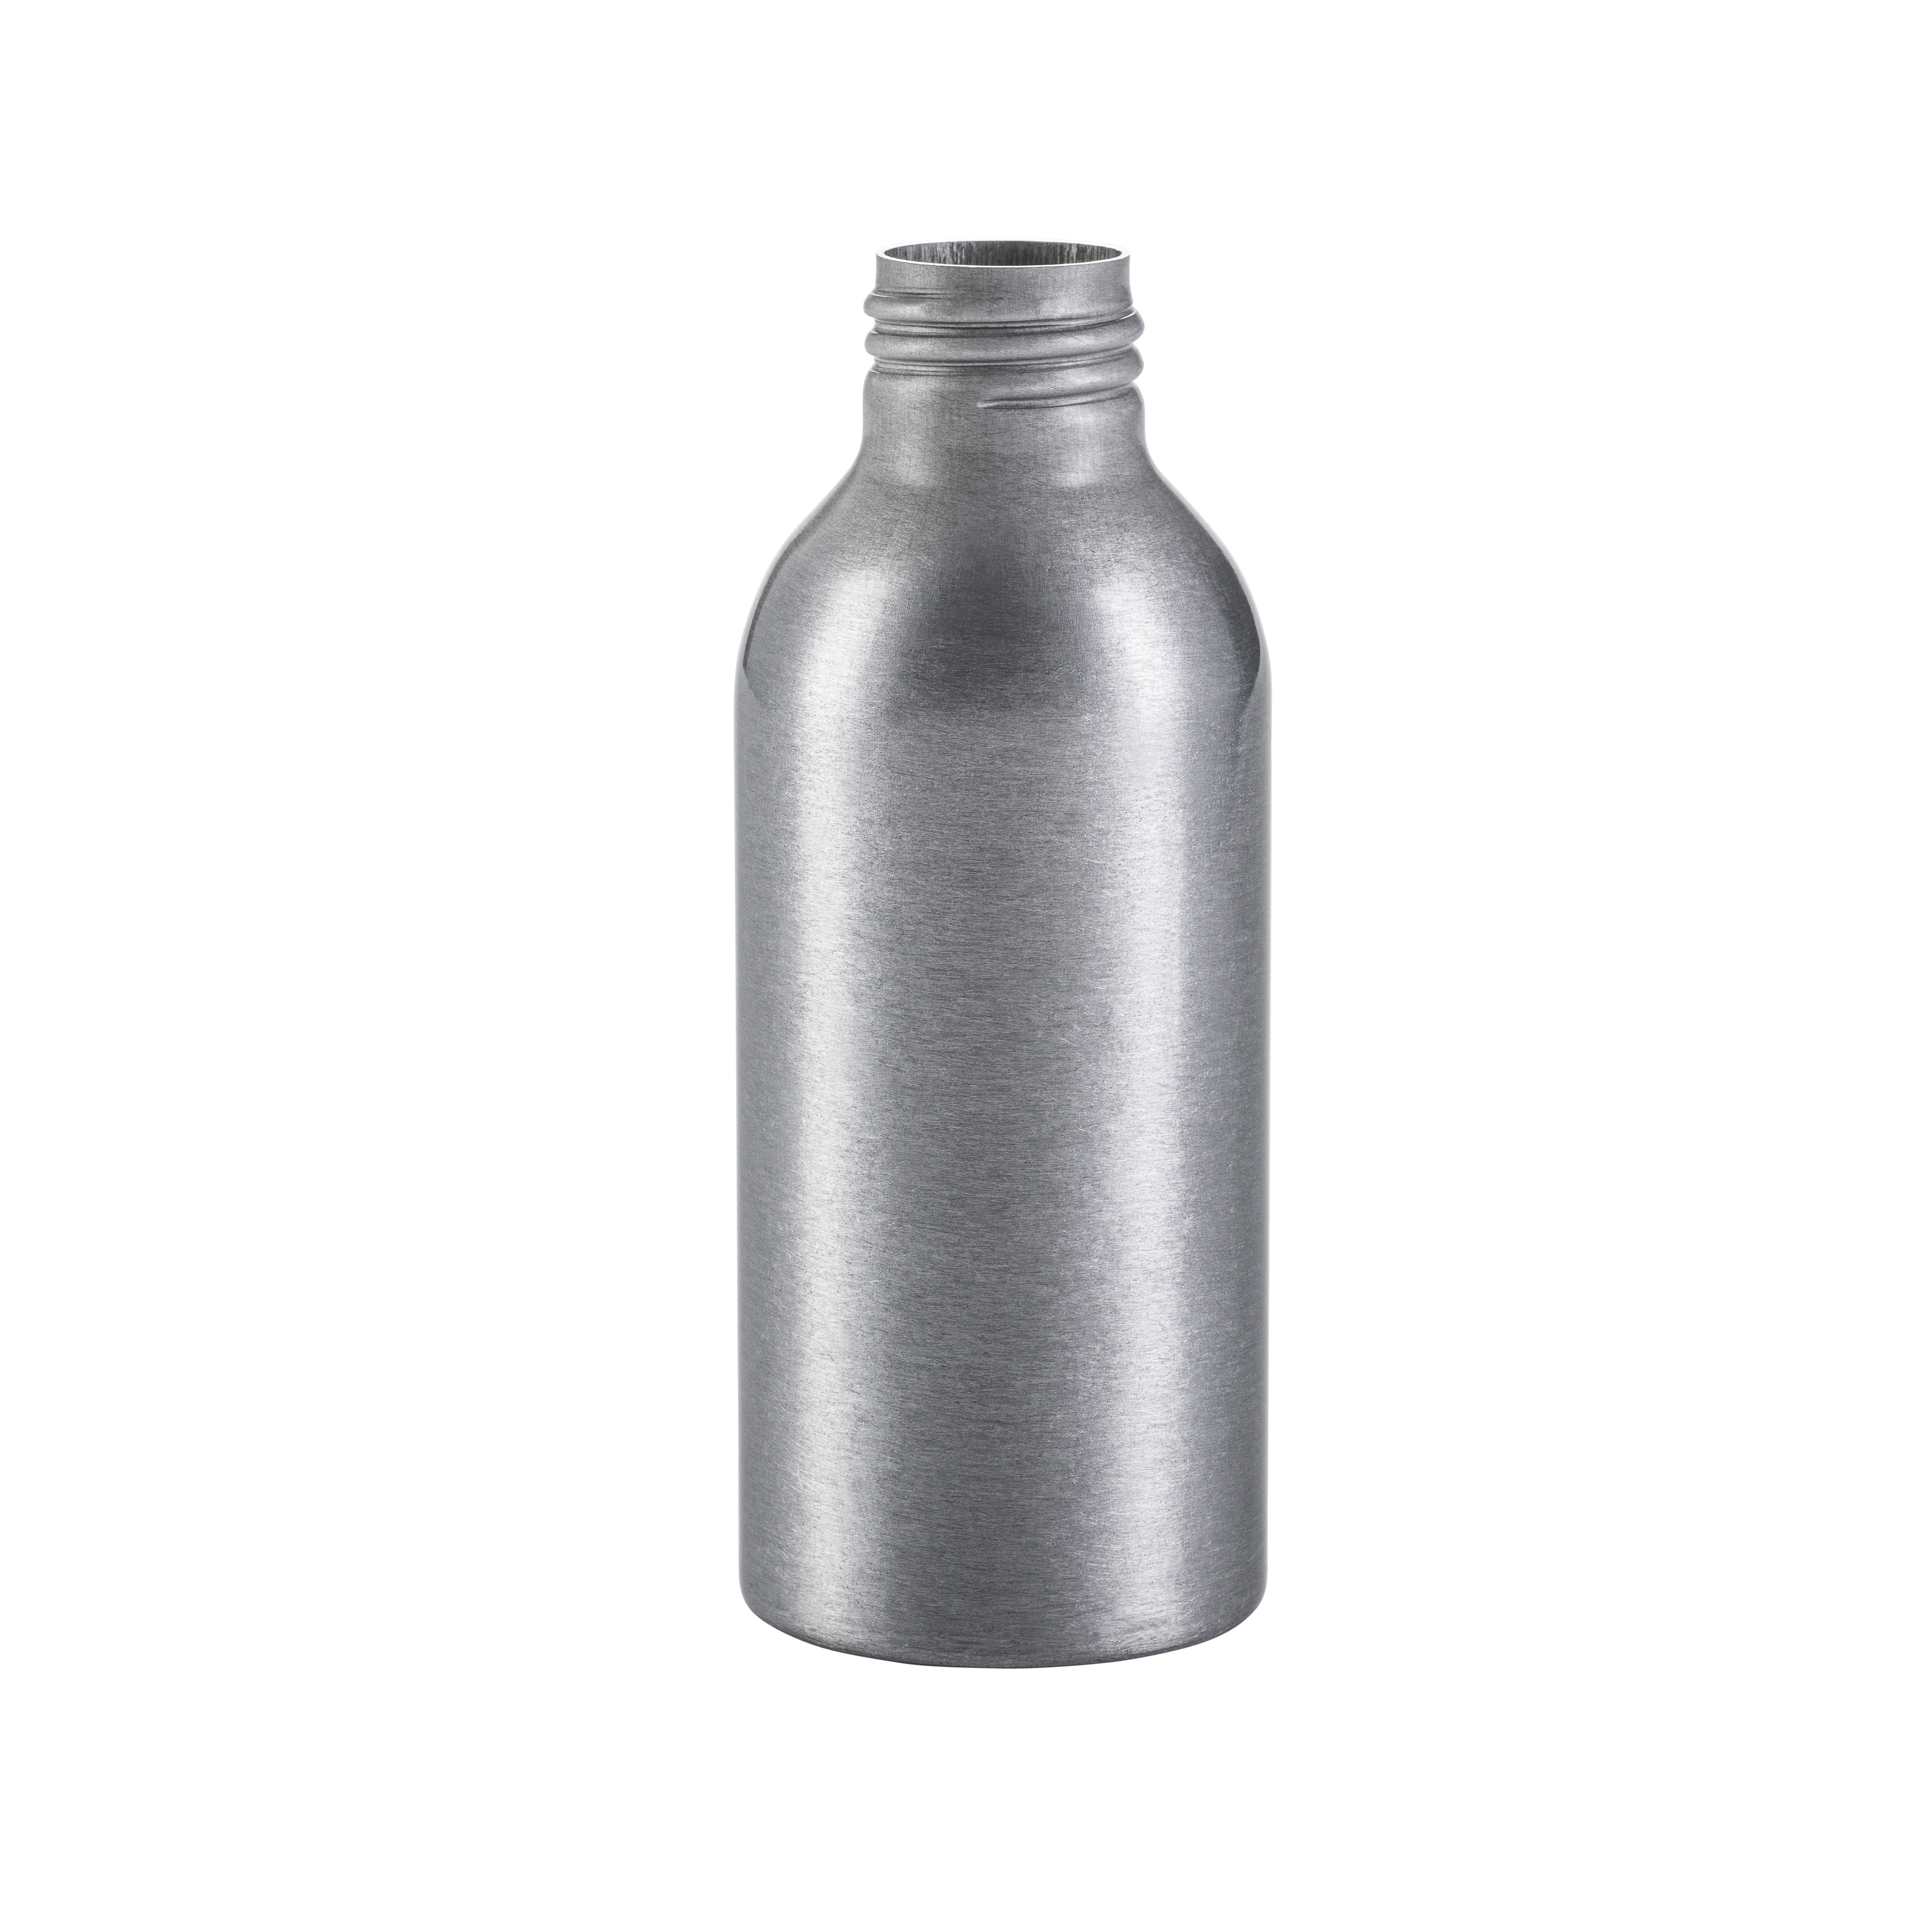 Silver Water bottle with screw top